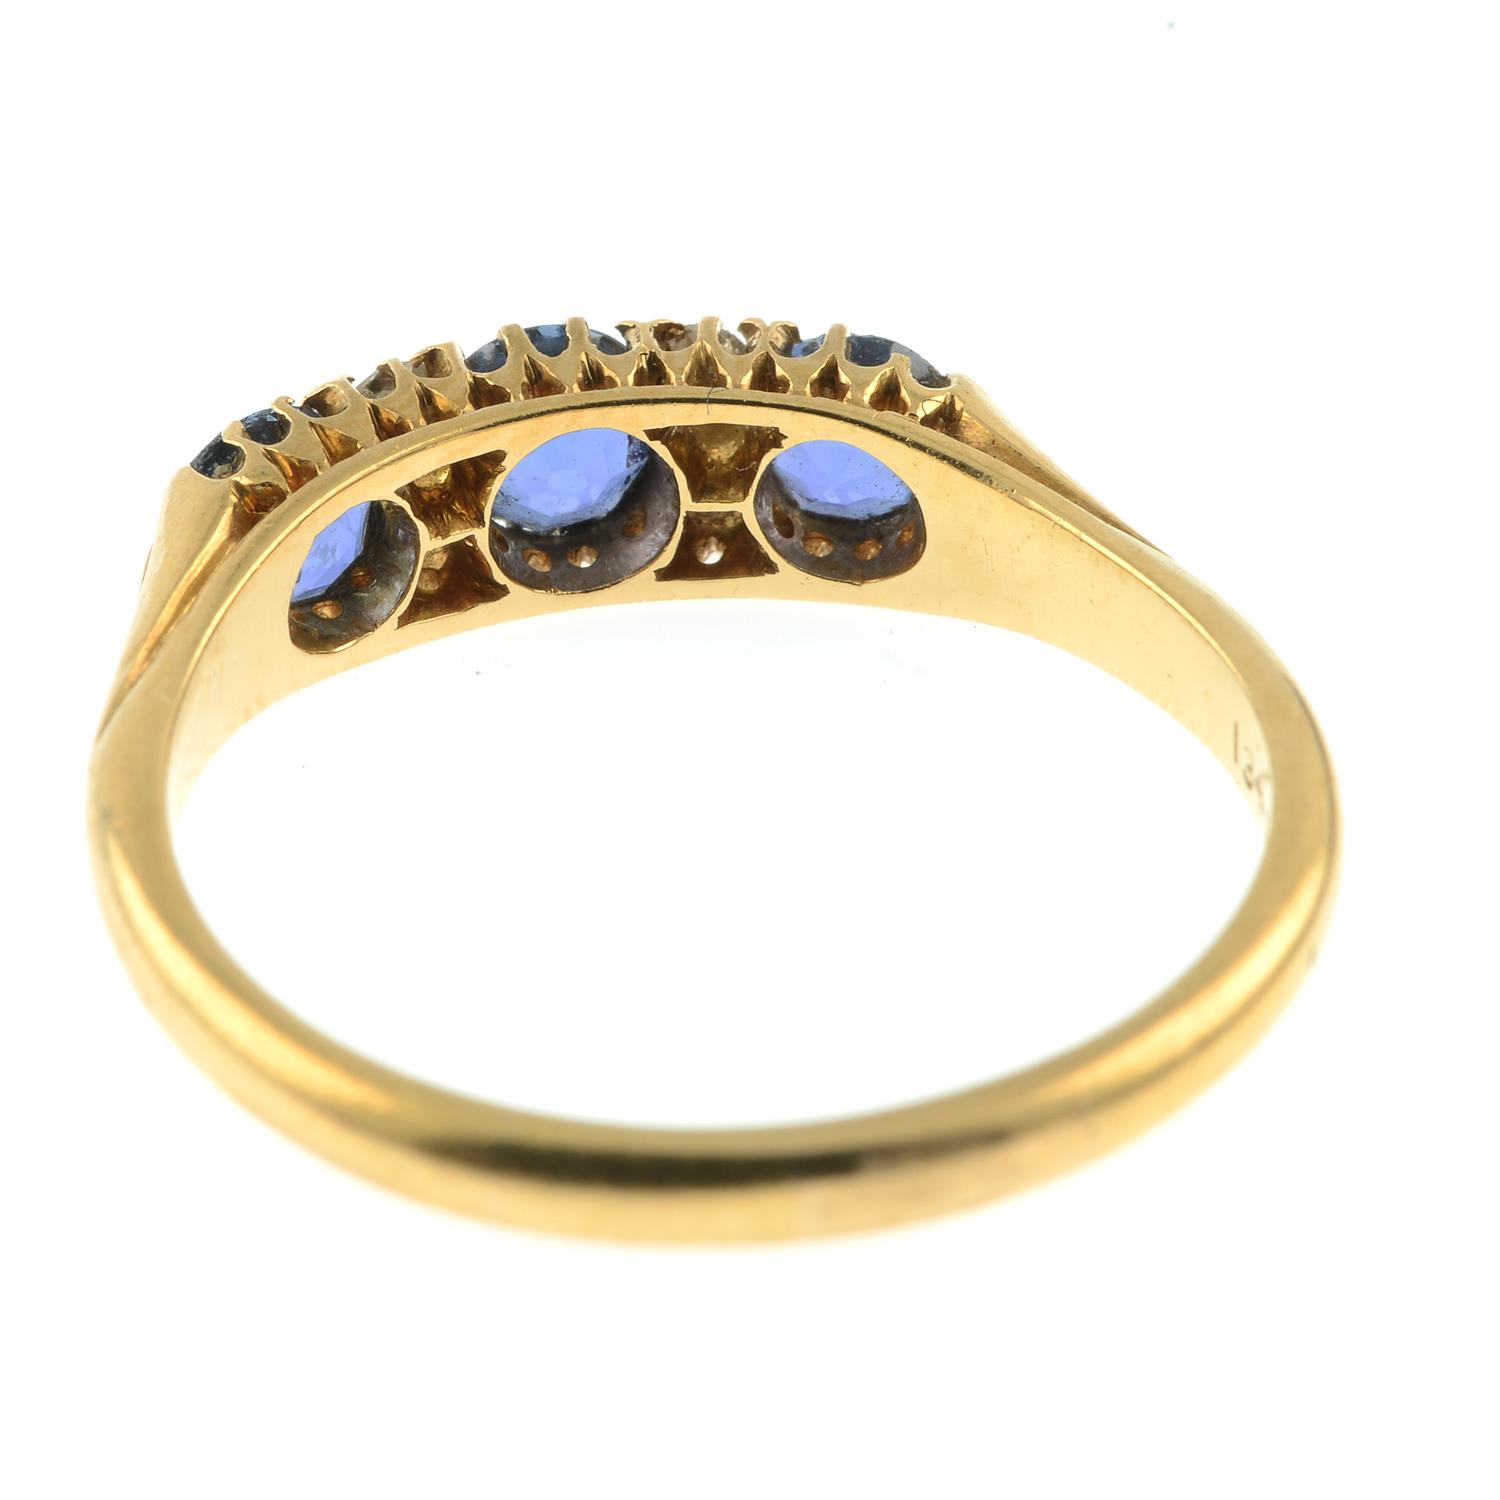 An early 20th century 18ct gold sapphire three-stone ring, with old-cut diamond double spacers. - Image 4 of 5